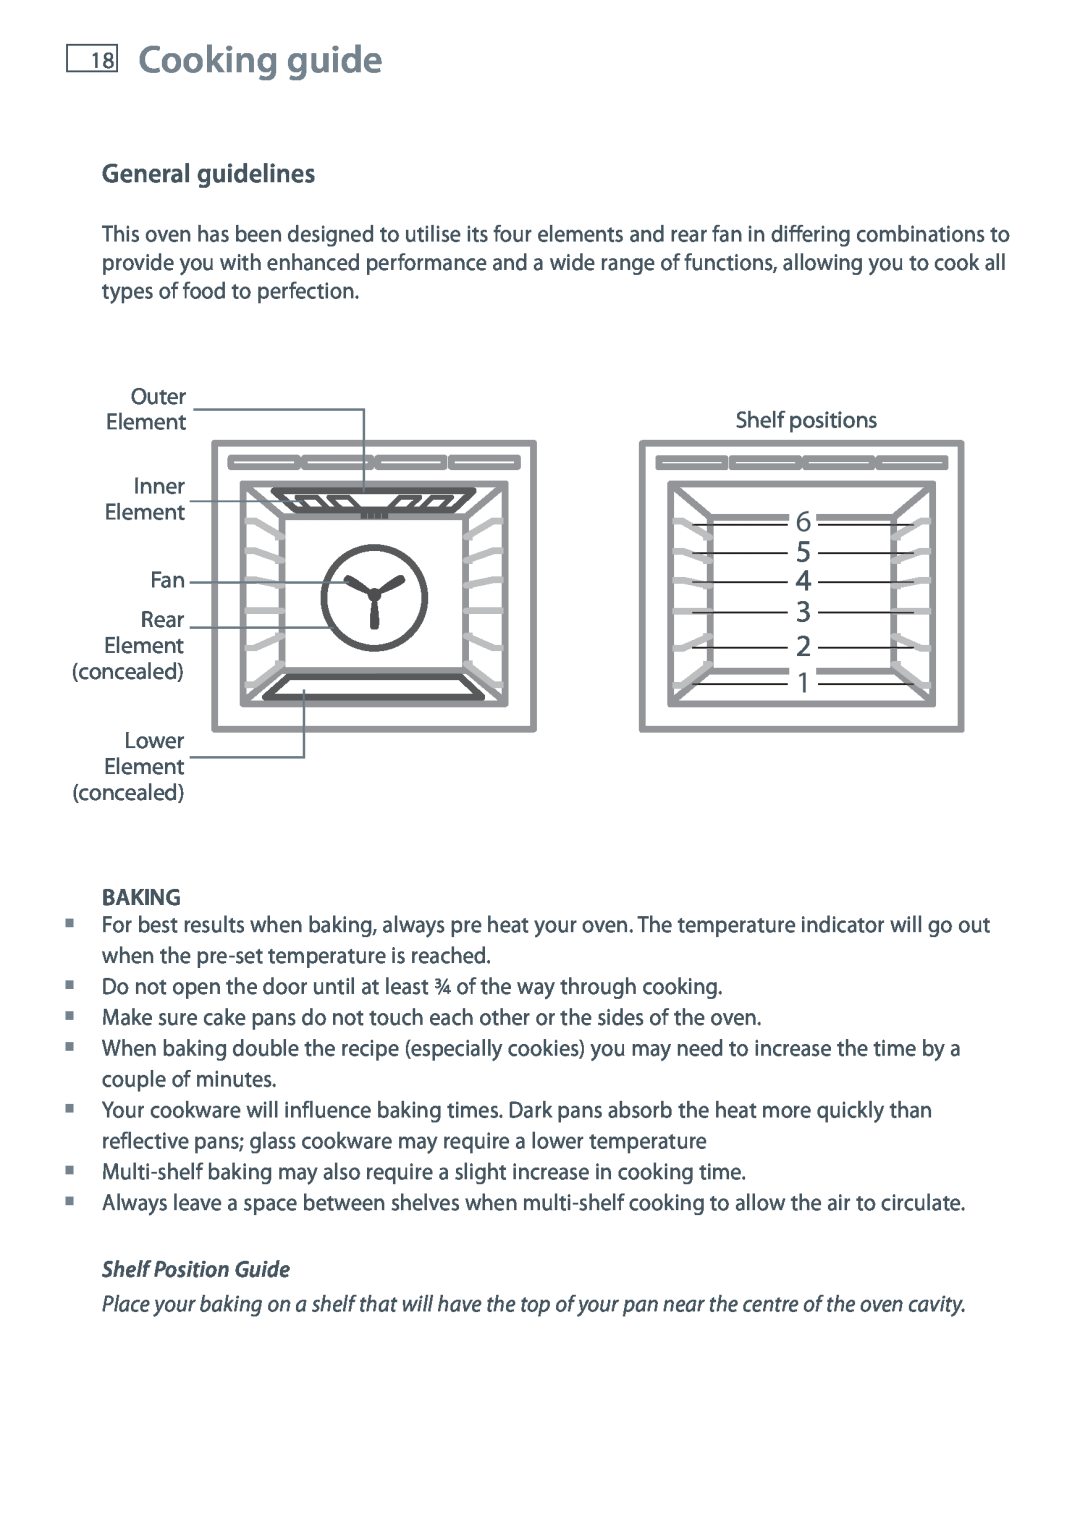 Fisher & Paykel OB60SL7 manual Cooking guide, General guidelines, Baking, Shelf Position Guide 